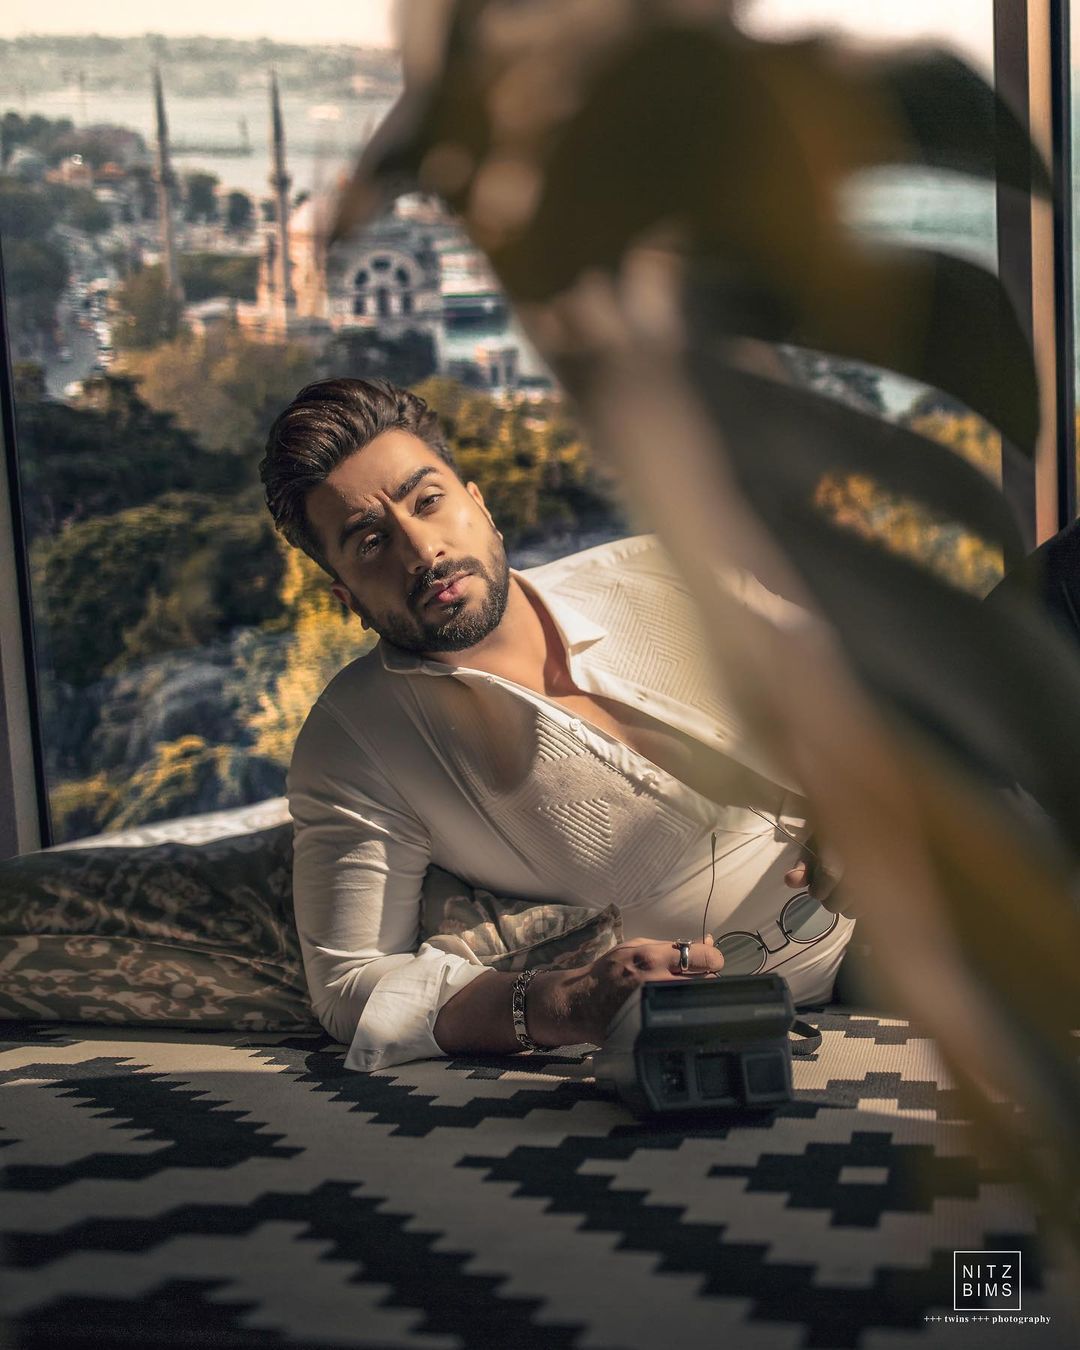 Bigg Boss 14: Aly Goni To Enter The Controversial Reality Show On November 4; Getting Rs. 16 Lakhs Per Week For His Stay?